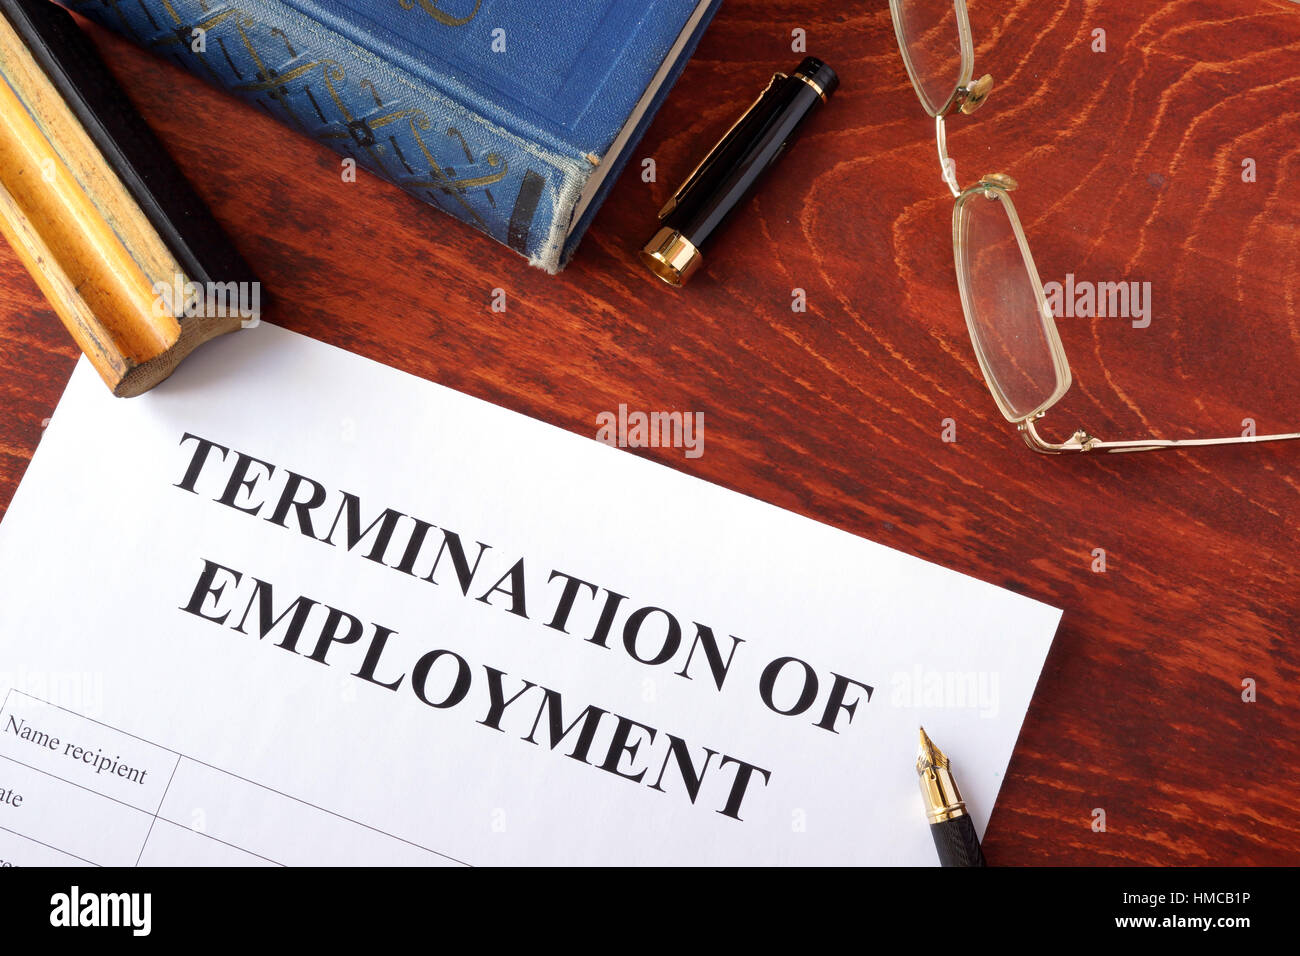 Termination of employment form on a wooden surface. Stock Photo